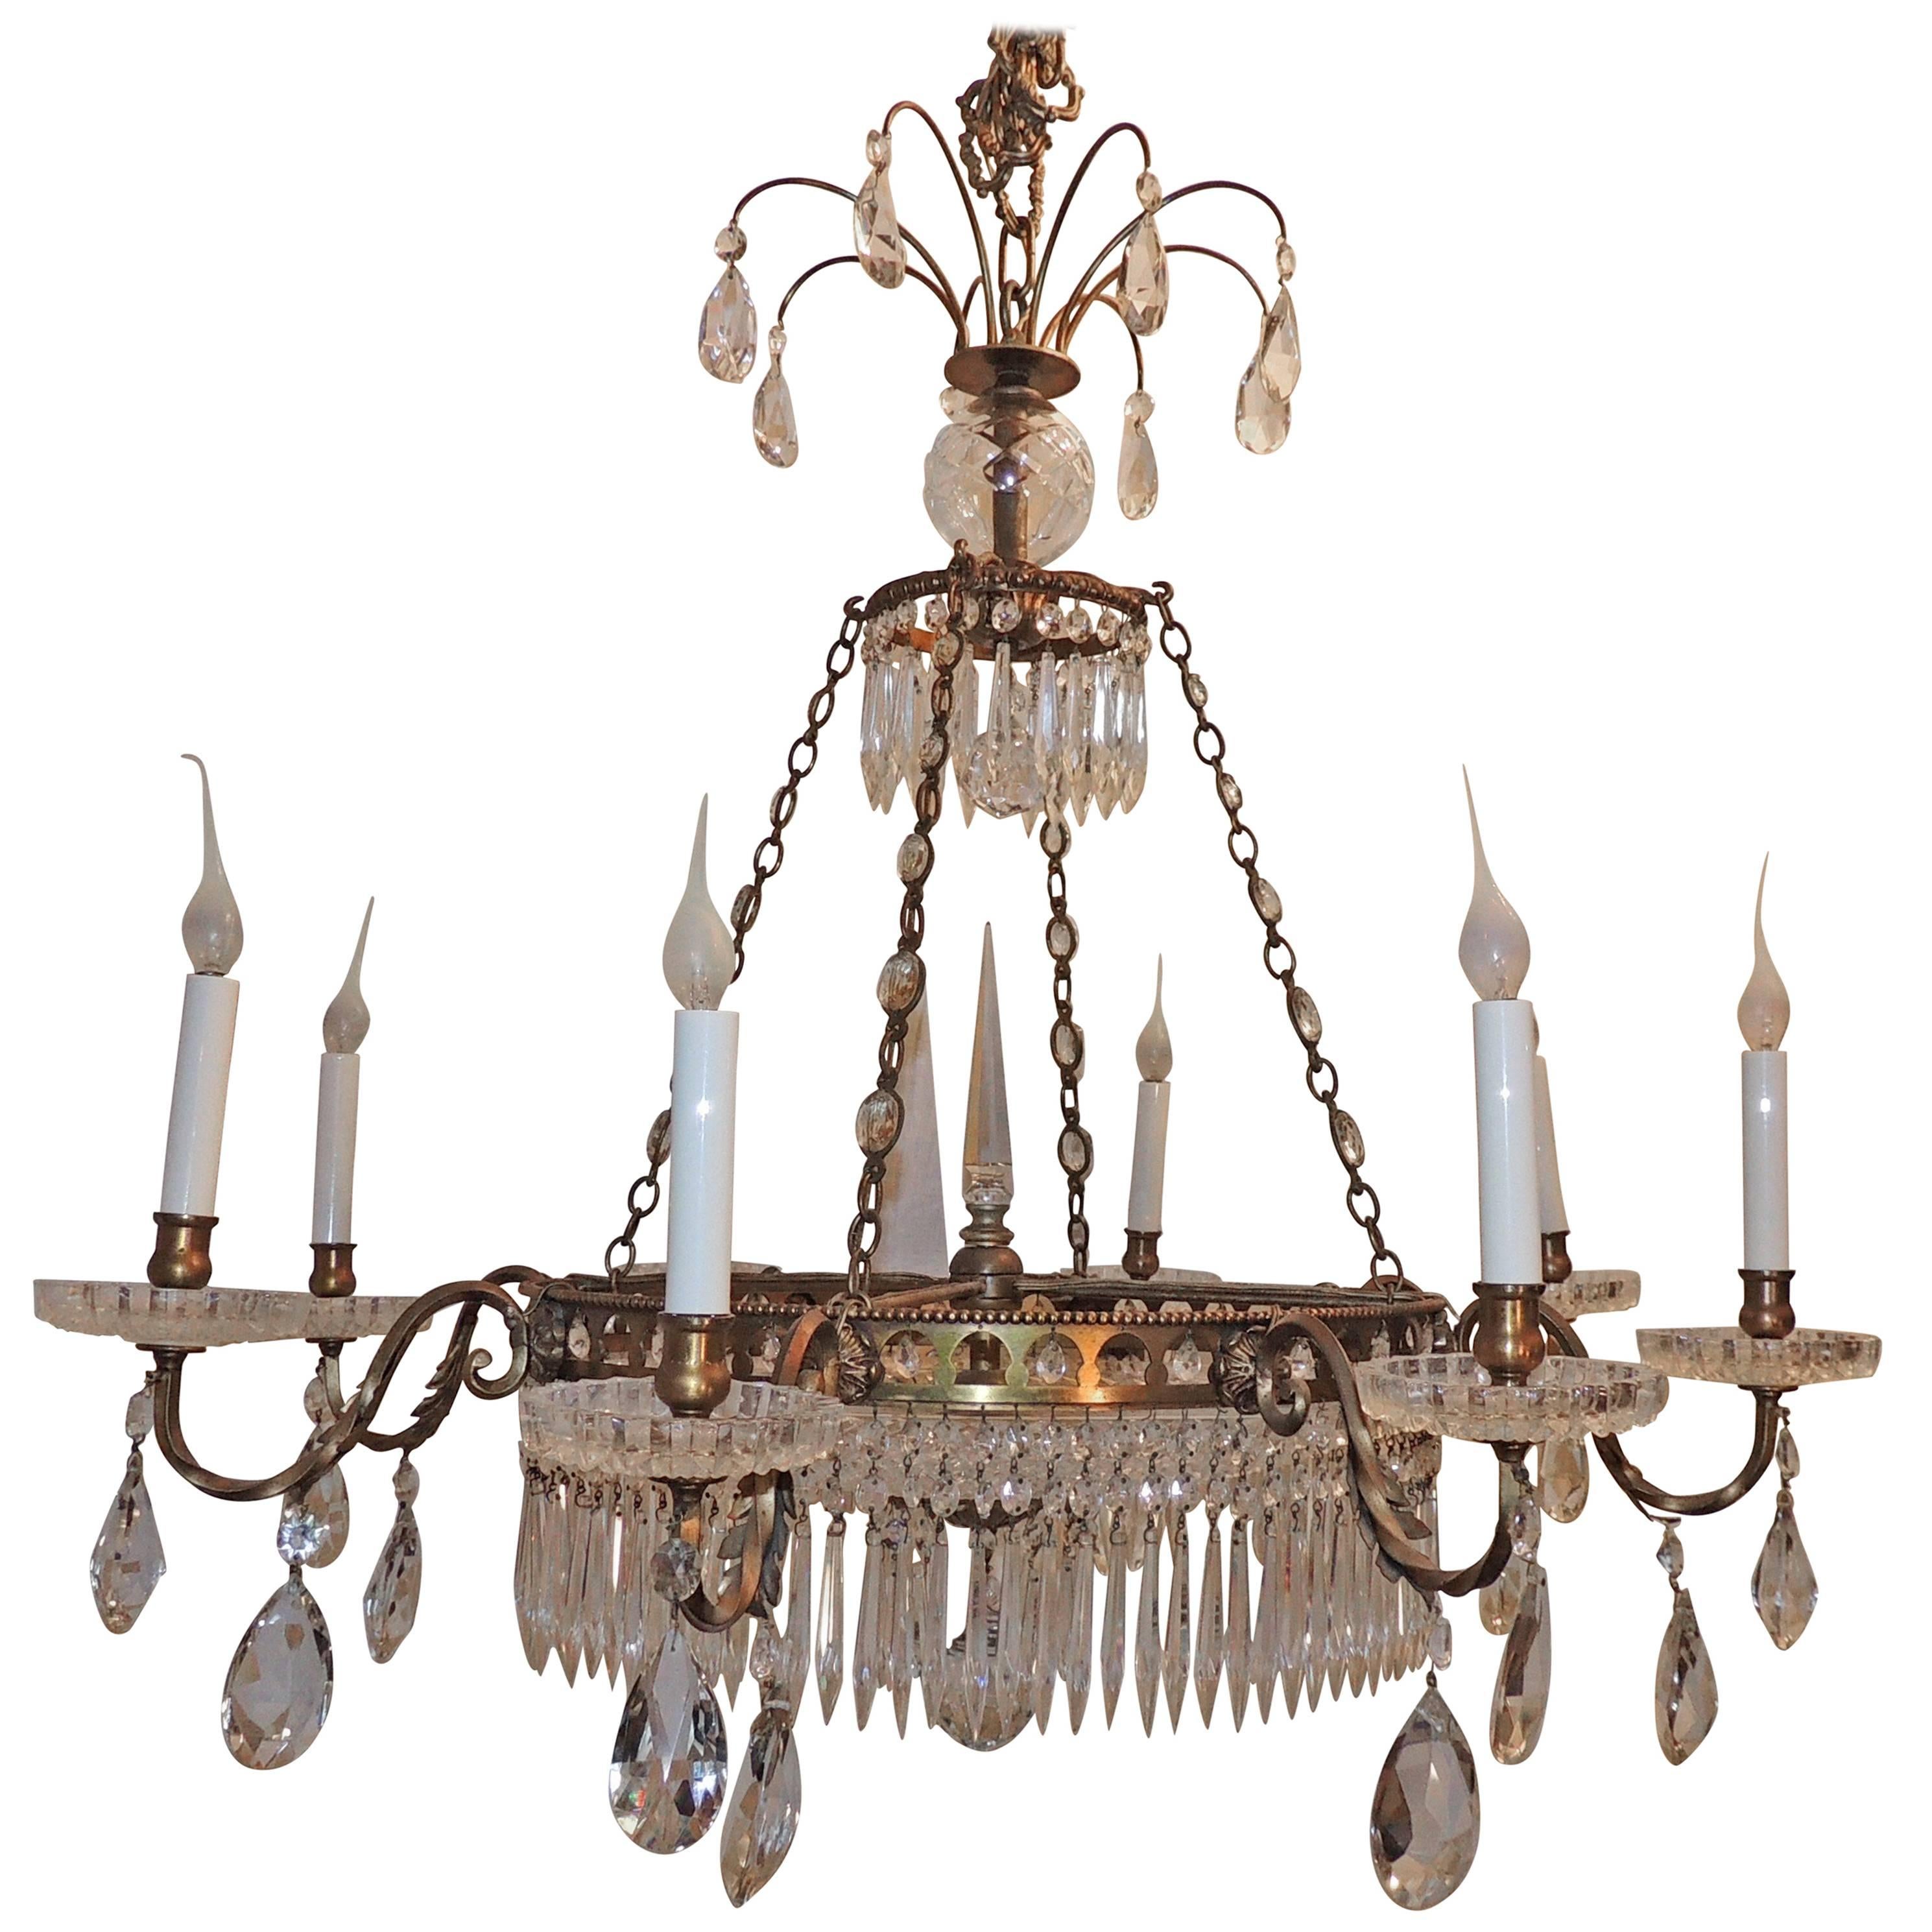 Wonderful French Bronze Regency Empire Crystal 12-Light Neoclassical Chandelier For Sale